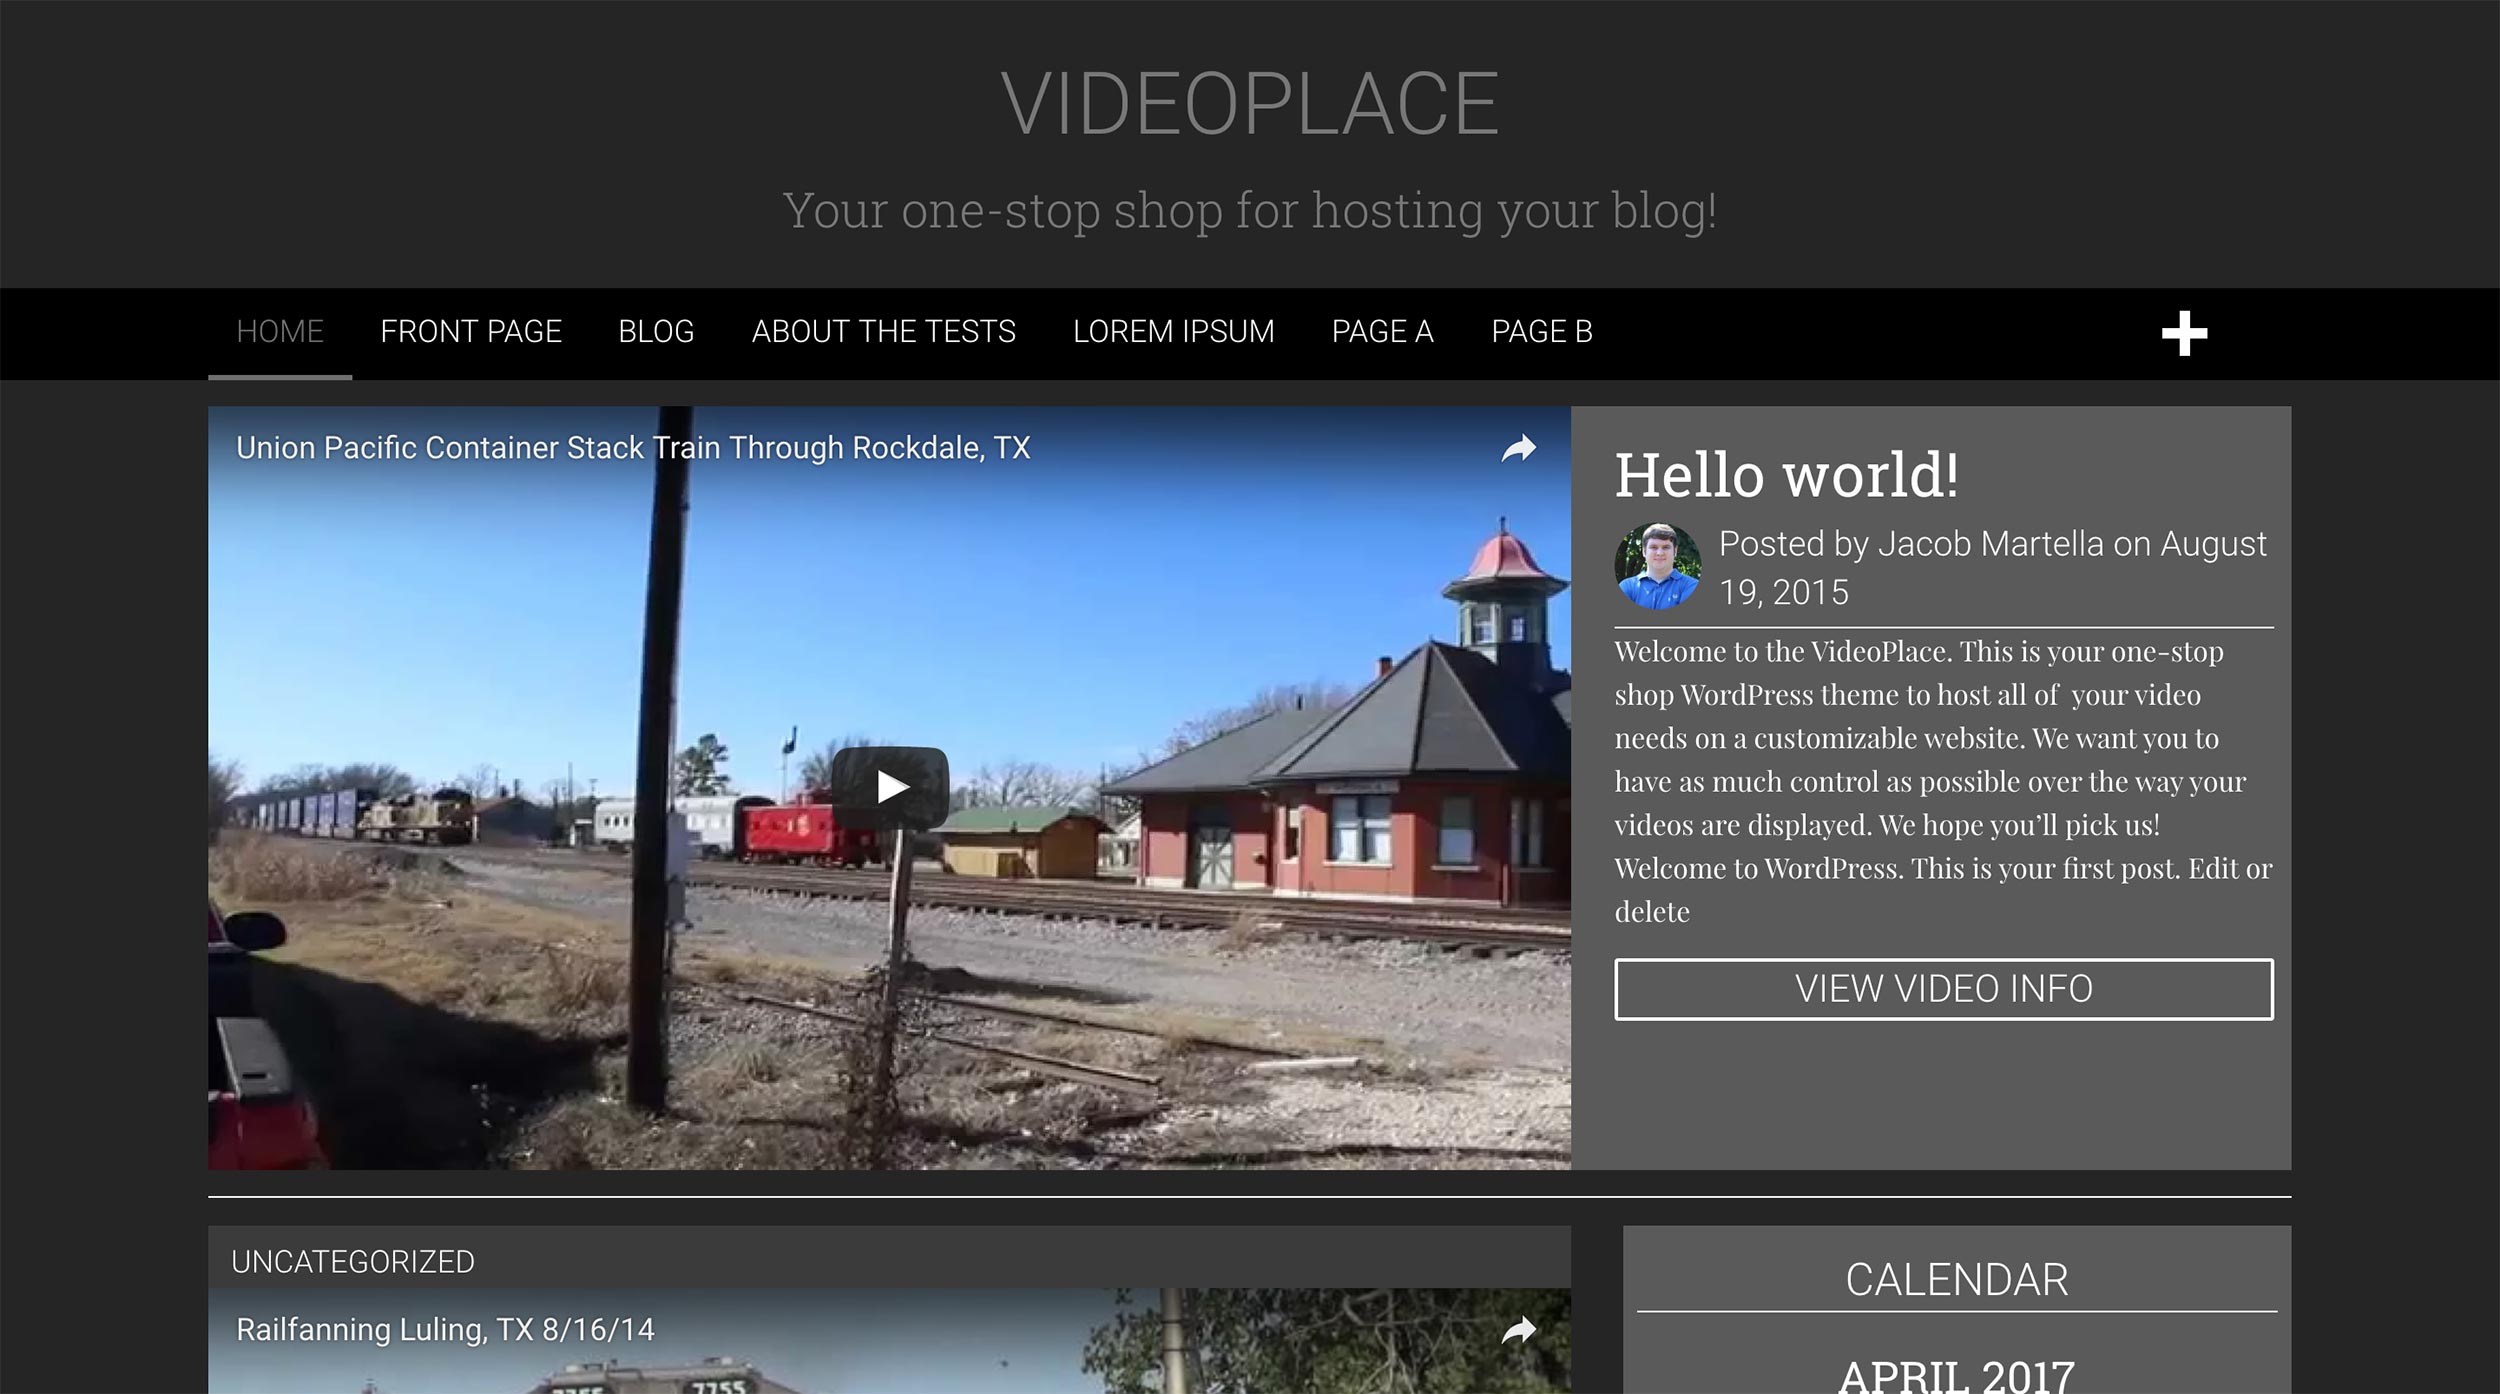 Homepage of the VideoPlace WordPress theme